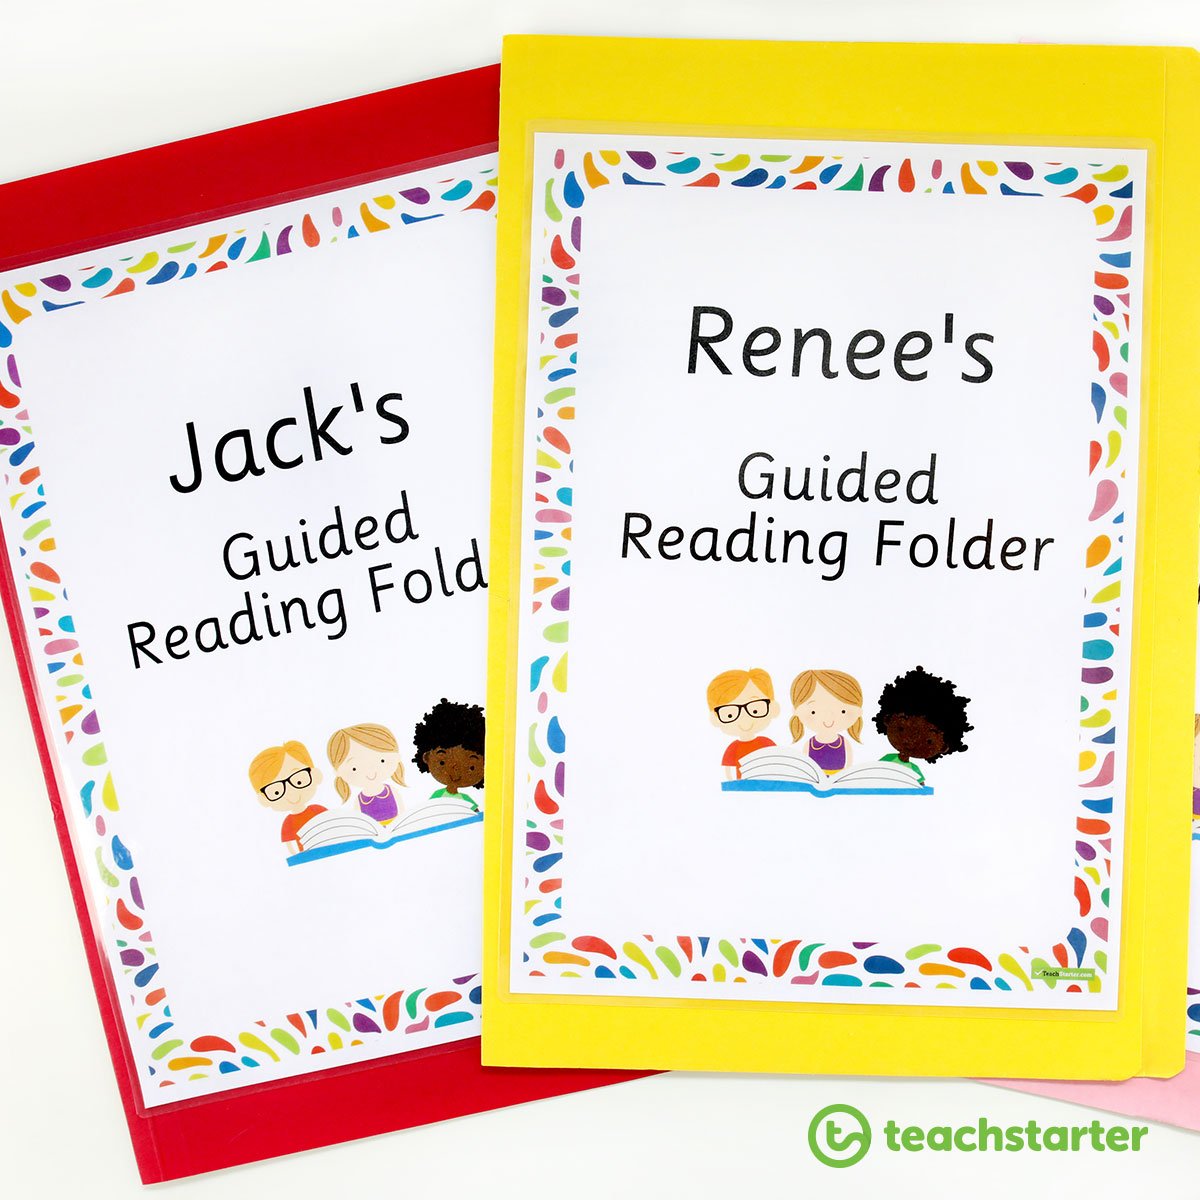 Setting up a Student Guided Reading Folder